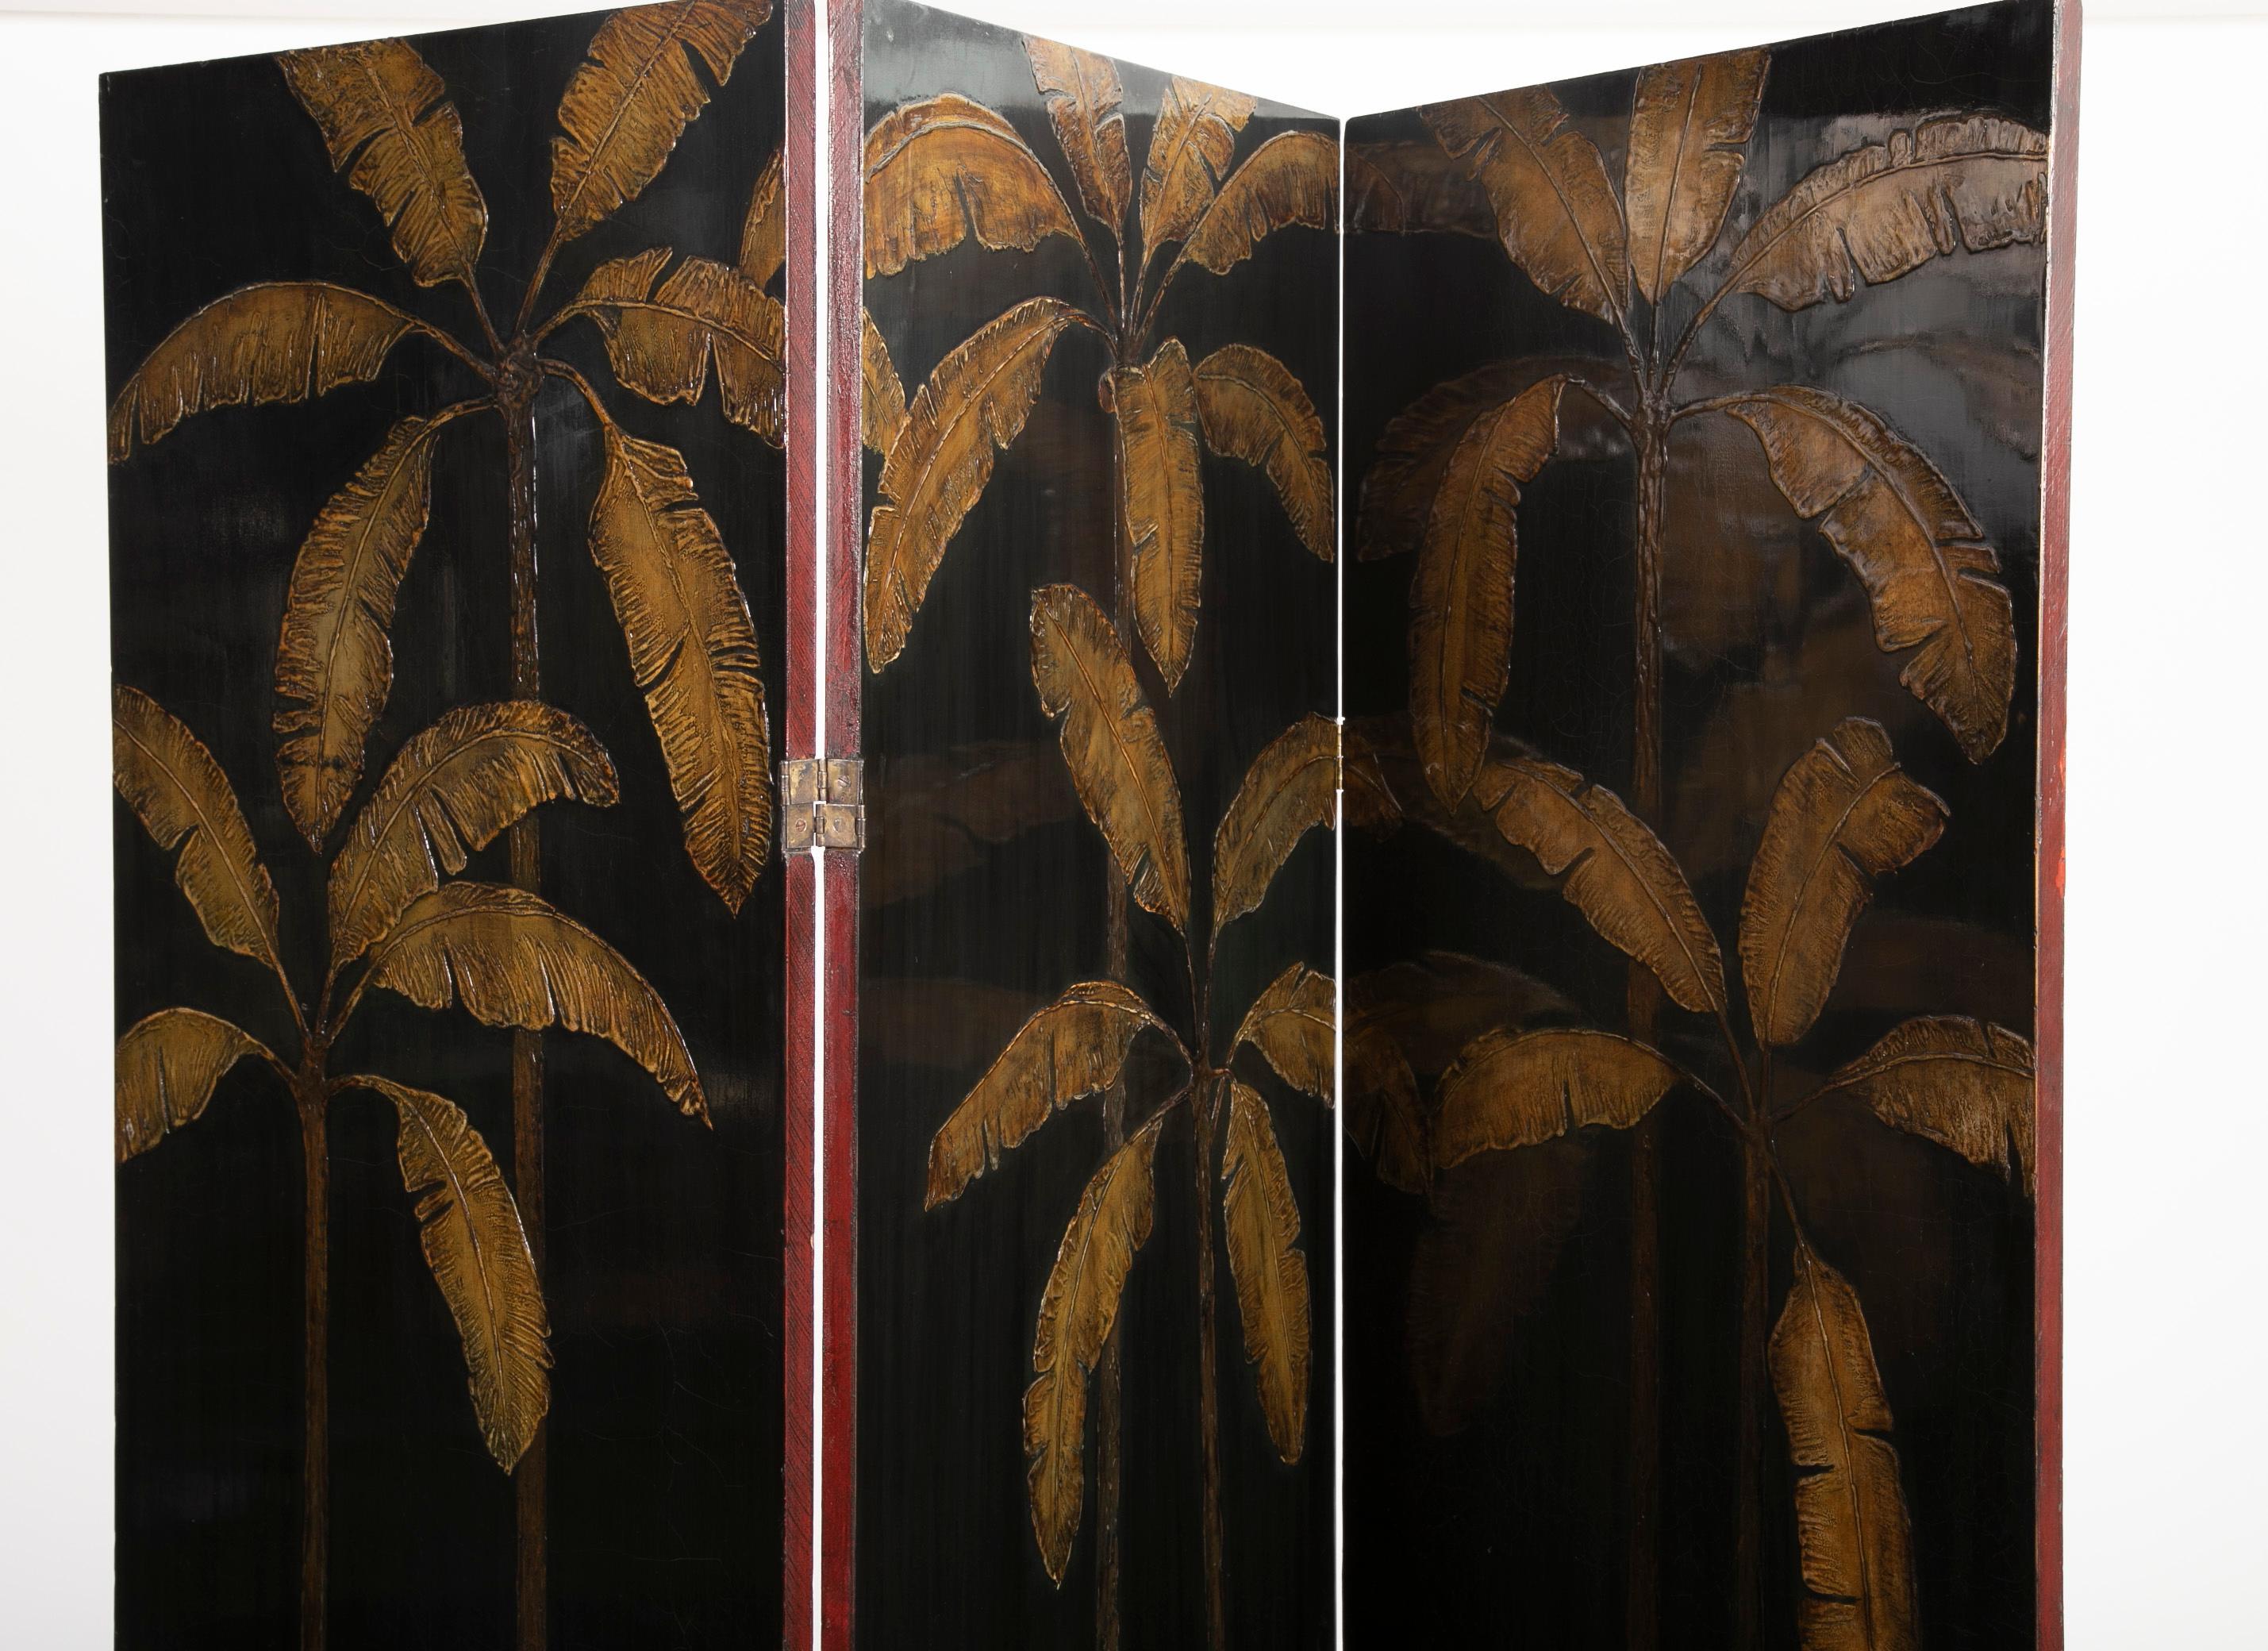 Chinoiserie Painted Three-Panel Screen Attributed to Robert Winthrop Chanler